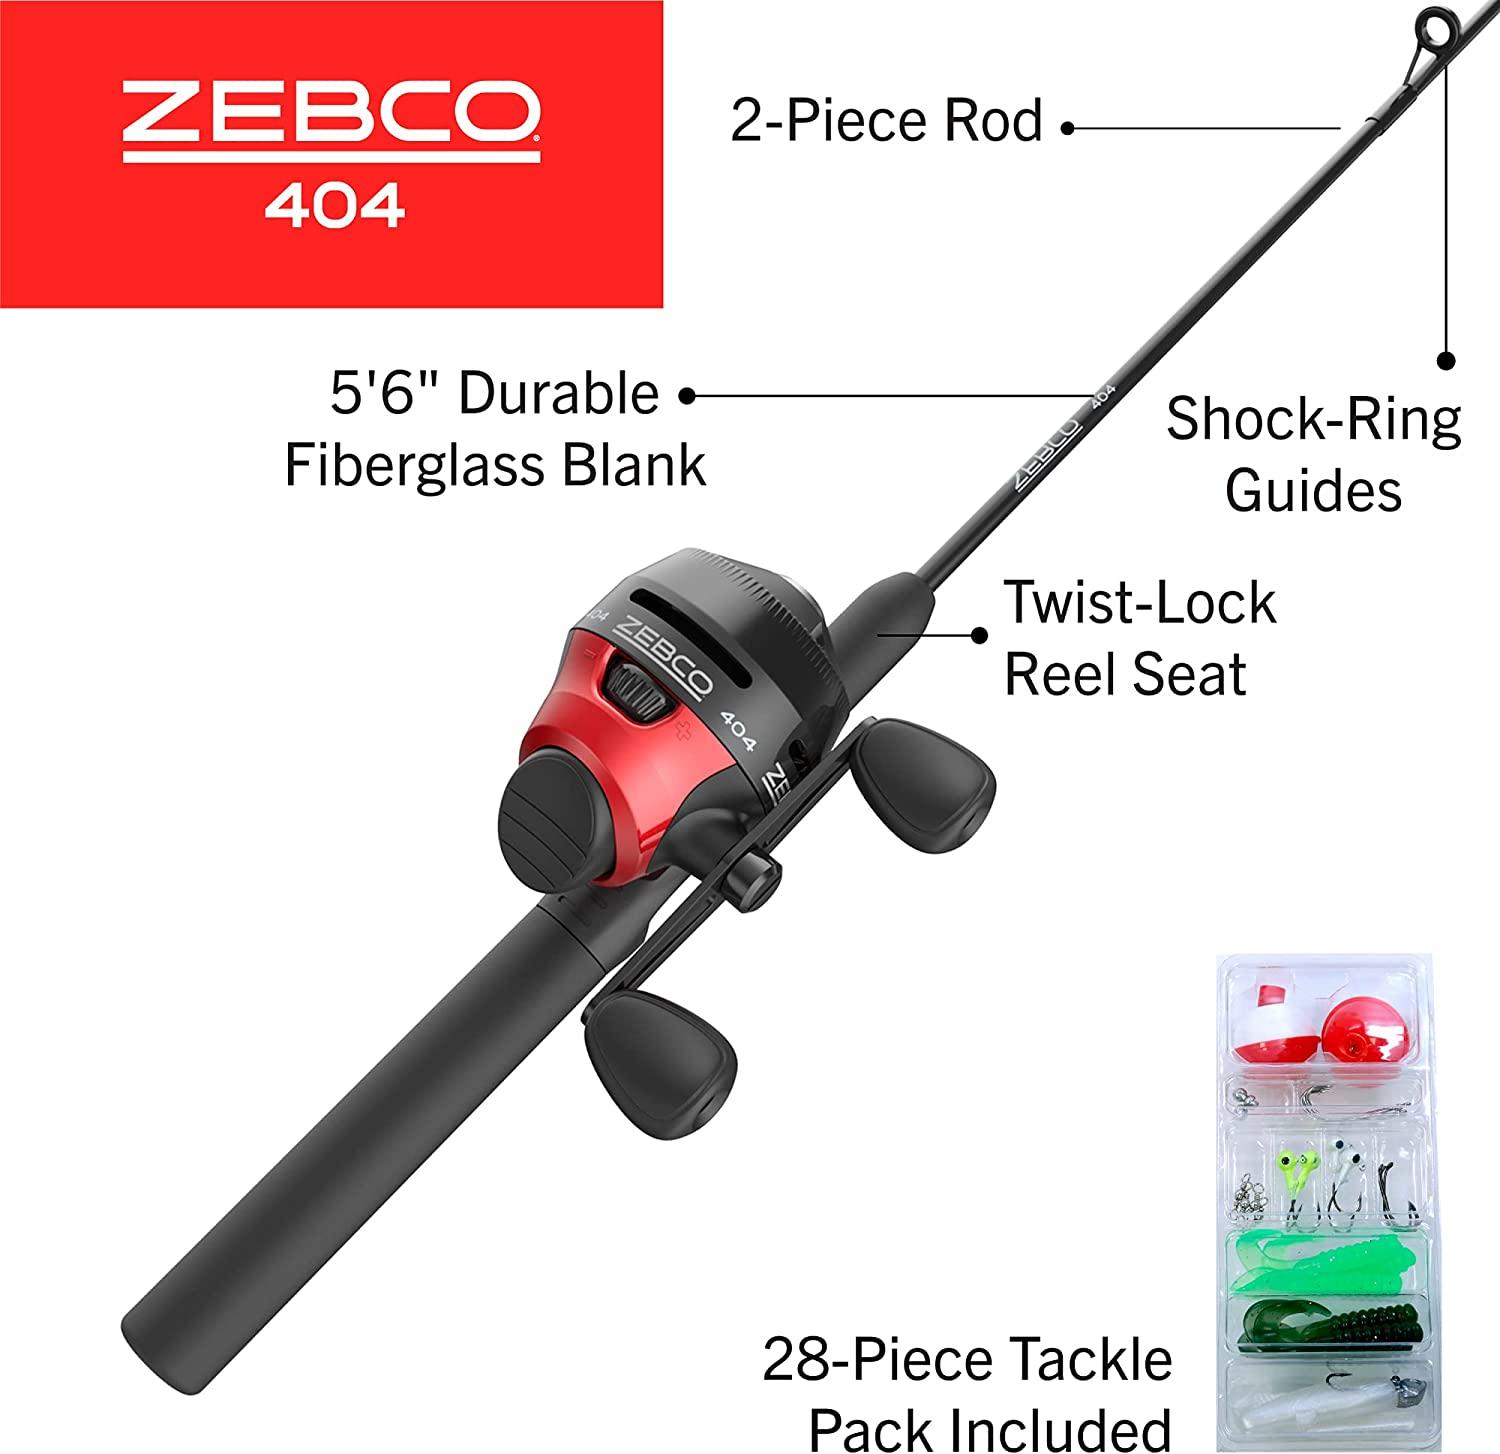 Zebco 404 Spincast Reel and 2-Piece Fishing Rod Combo Durable Fiberglass  Rod with EVA Handle QuickSet Anti-Reverse Reel with Built-In Bite Alert Pre- Spooled 56 Rod - With 28pc Tackle